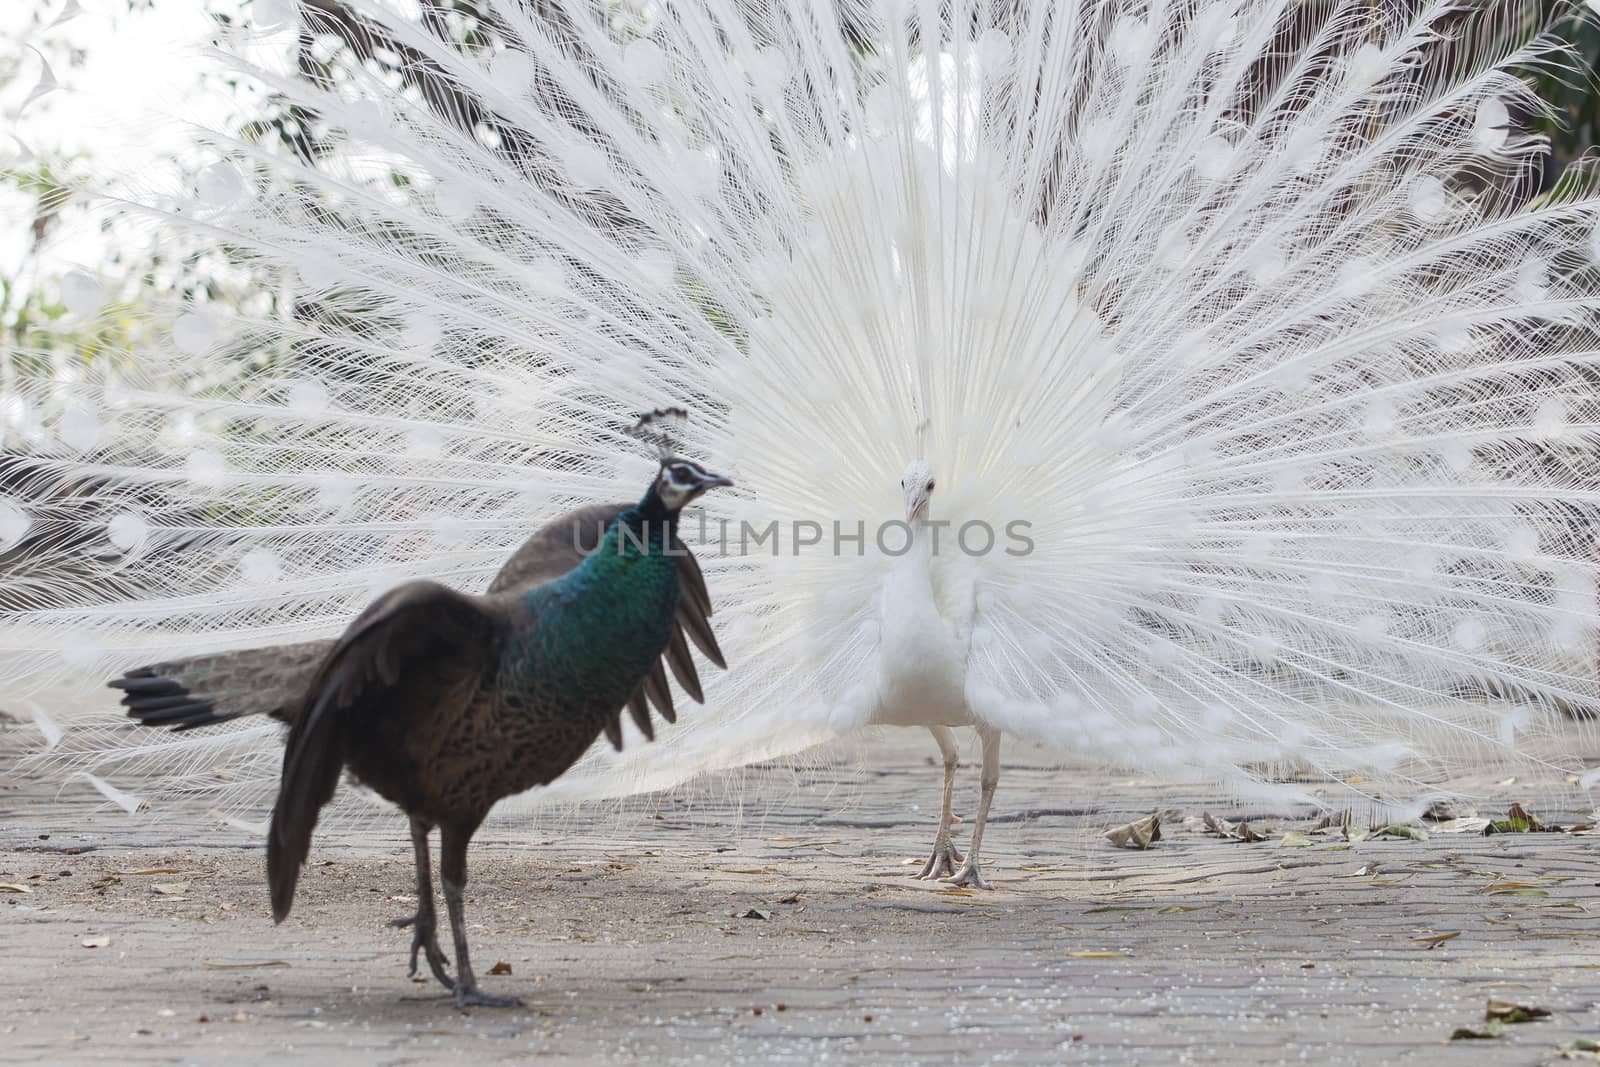 Peacock courting ritual, peahen looks at male